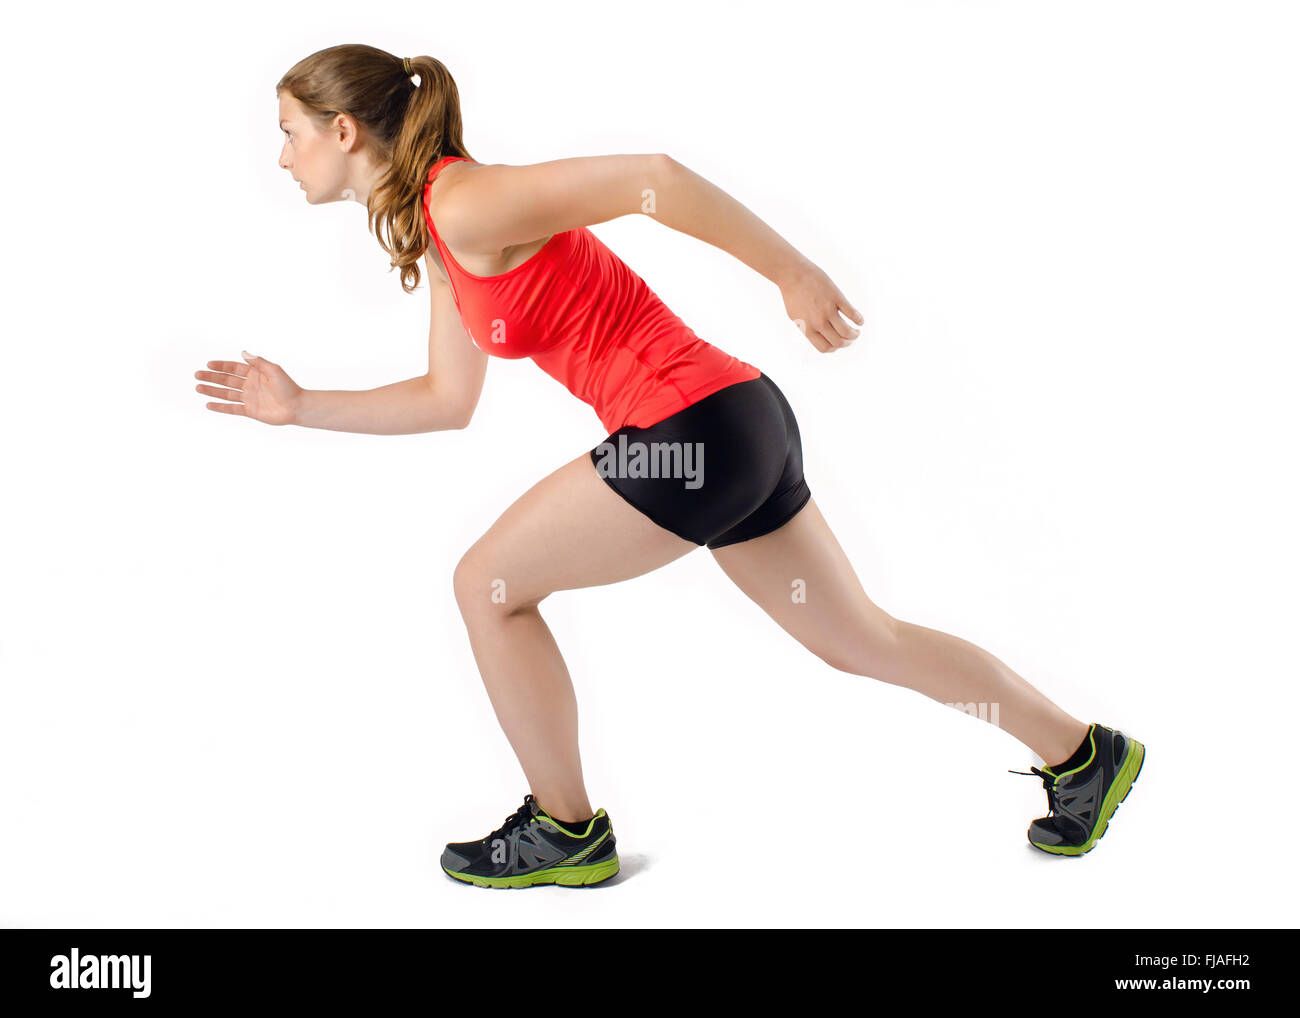 Young athletic sports woman running in profile. Isolated on white background. Stock Photo